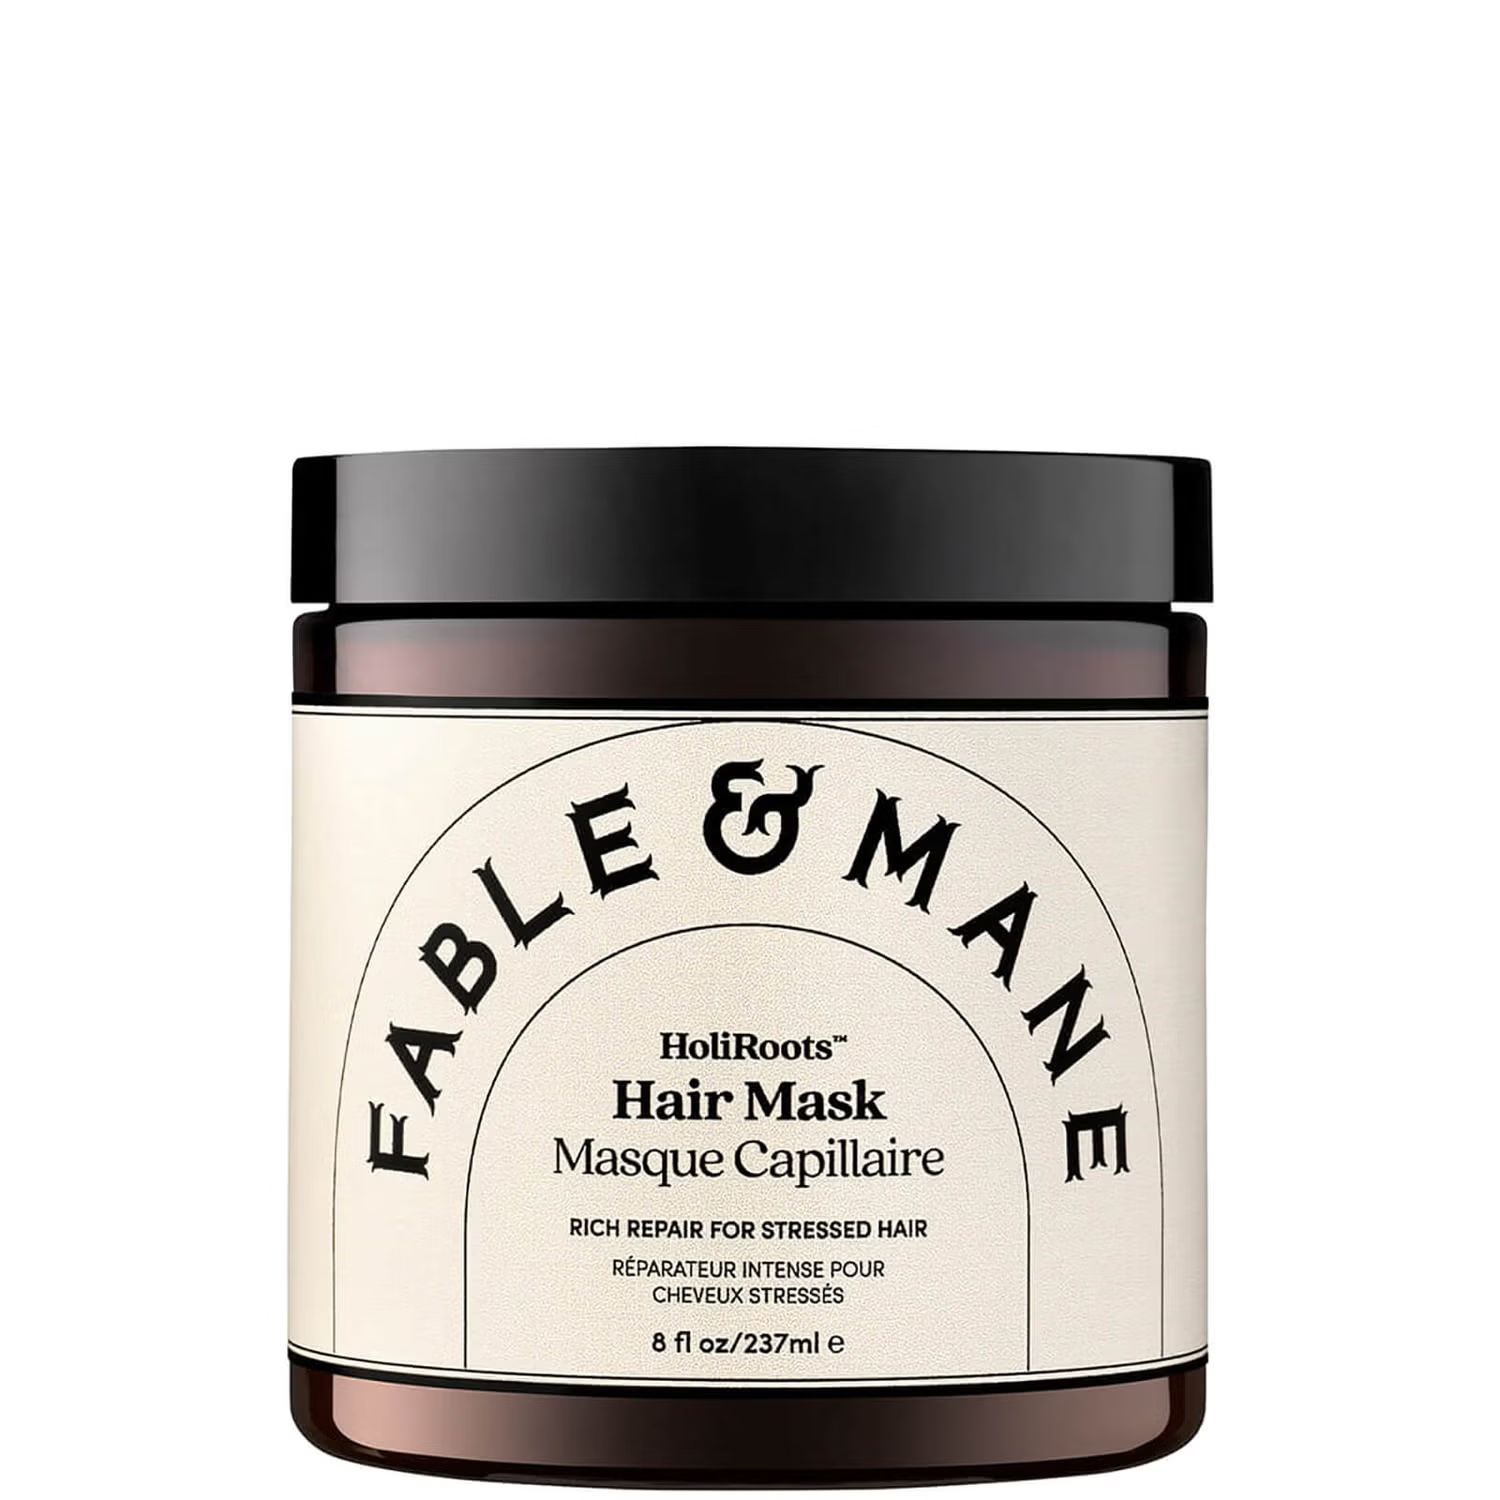 Fable & Mane HoliRoots Repairing Hair Mask | Cult Beauty